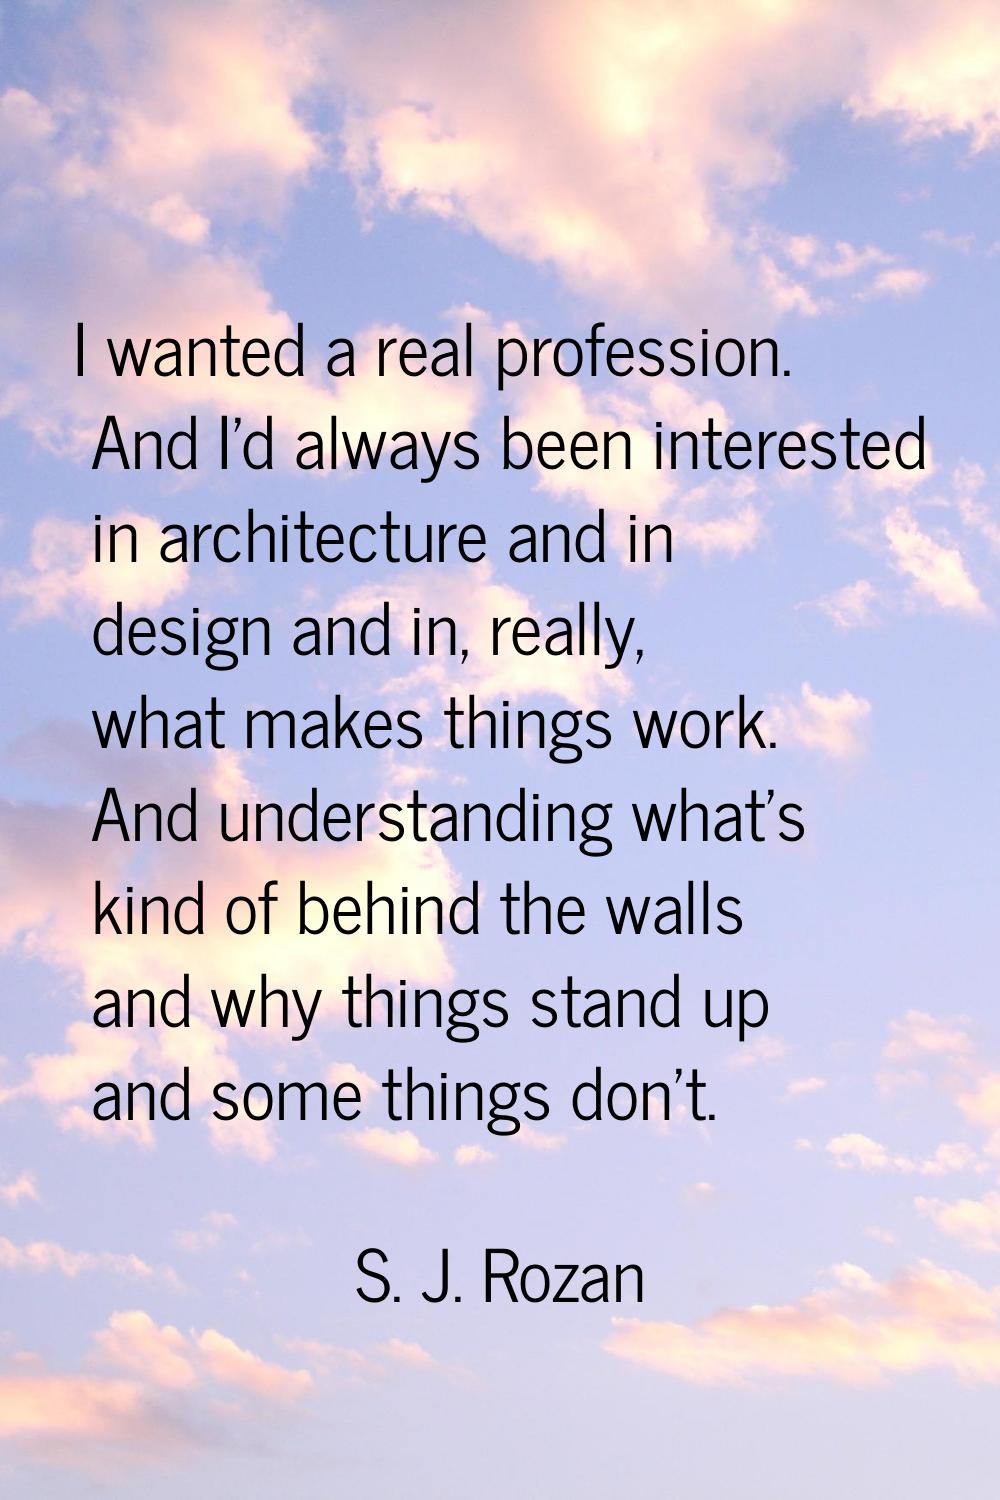 I wanted a real profession. And I'd always been interested in architecture and in design and in, re